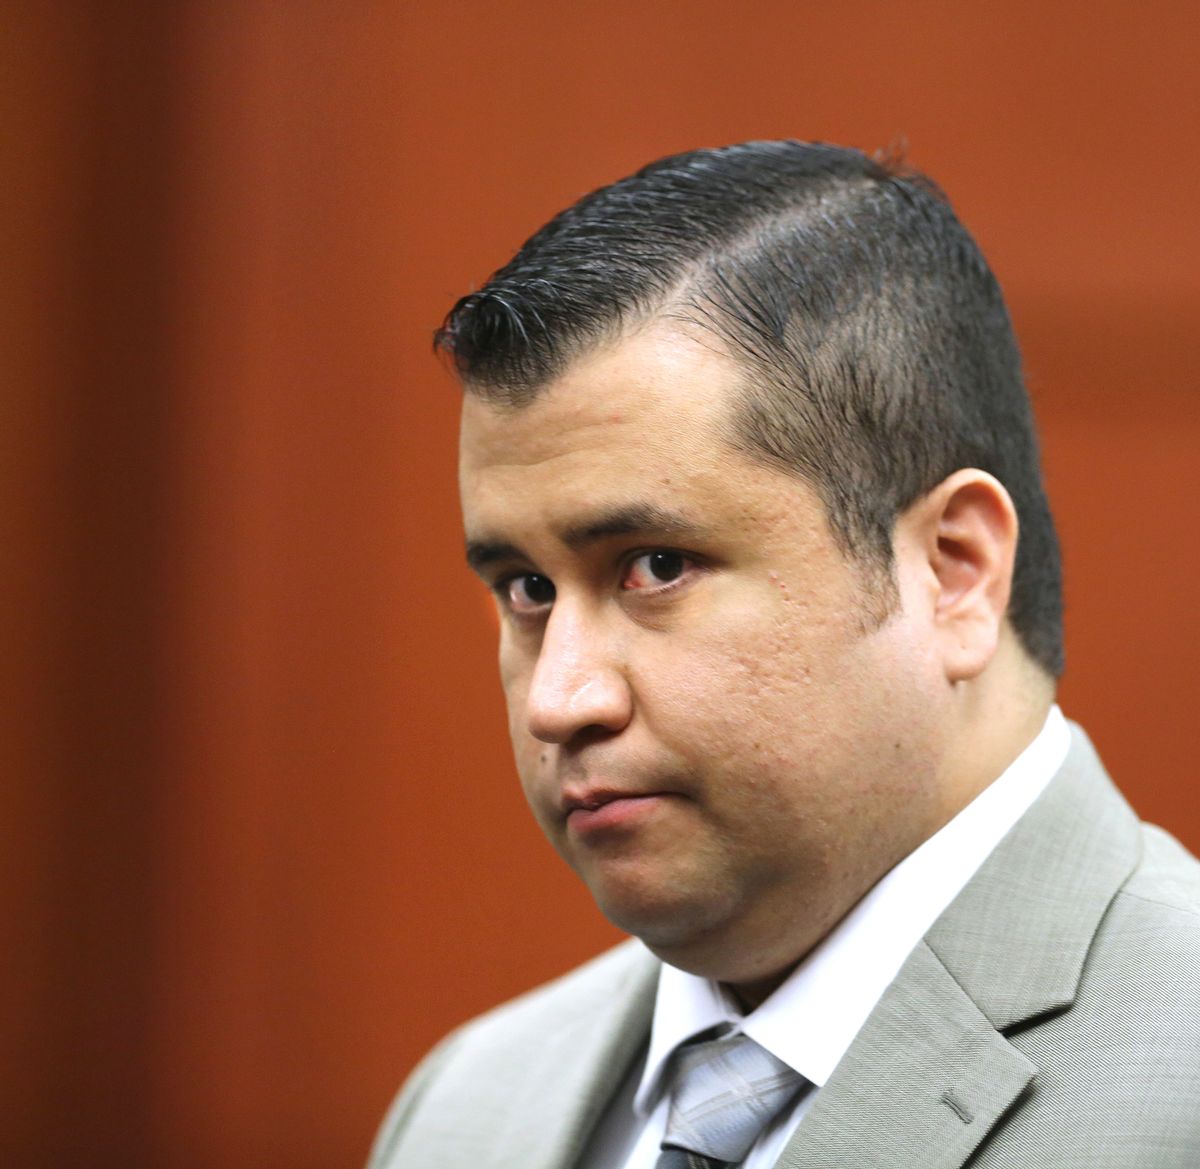 FILE - In this July 9, 2013 file photo, George Zimmerman leaves the courtroom for a lunch break his trial in Seminole Circuit Court, in Sanford, Fla. A police report says a man charged with shooting at George Zimmerman on May 11, 2015, had a fixation on the former neighborhood watch leader. The report made public Tuesday, May 19, 2015,  says 36-year-old Matthew Apperson had recently been admitted to a mental institution and had shown signs of paranoia, anxiety and bipolar disorder. (AP Photo/Orlando Sentinel, Joe Burbank, Pool, File via AP) (AP)